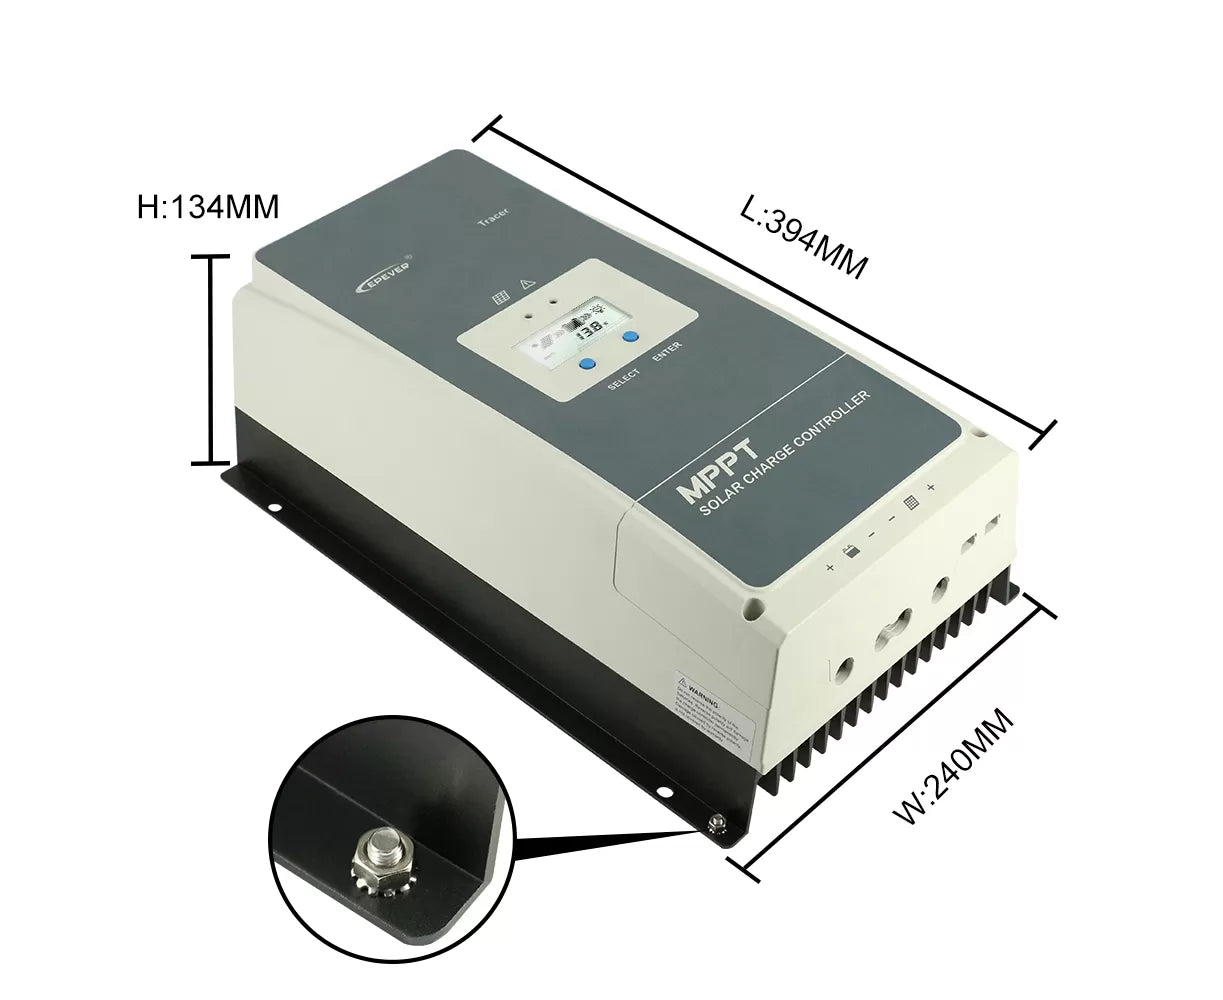 Tracer8415AN - EPever 80A MPPT Solar Charge Controller